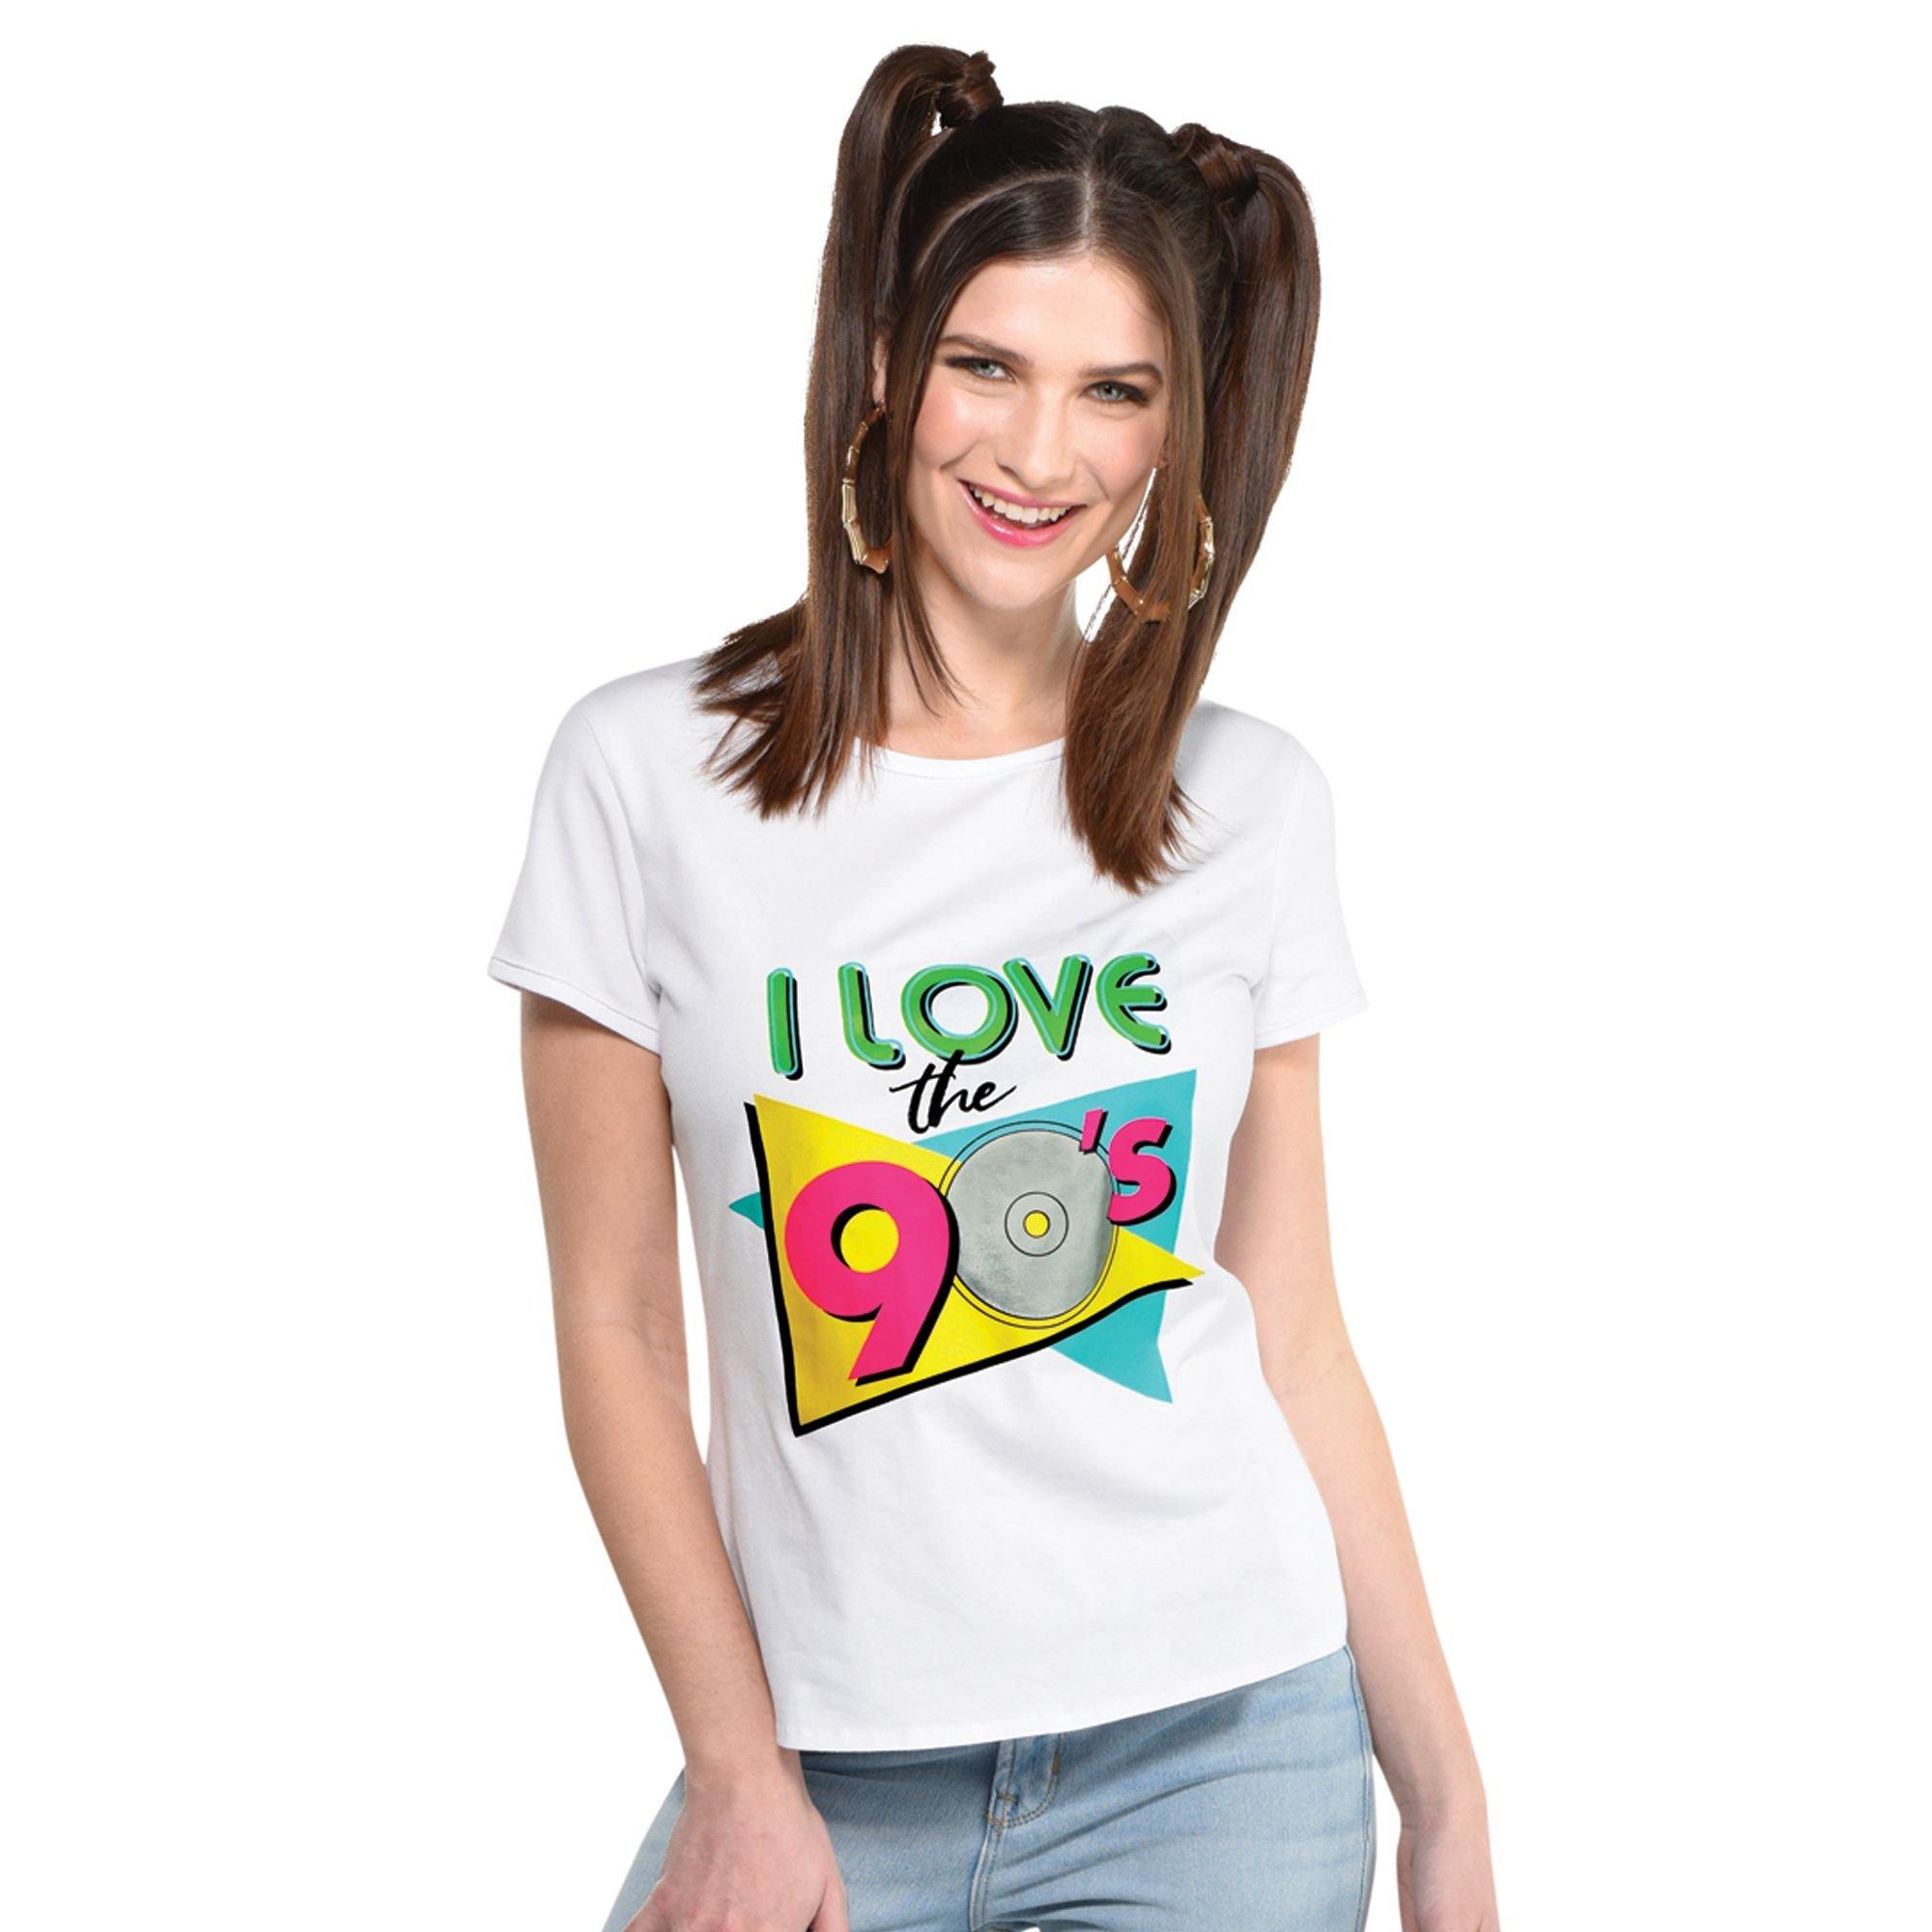 I Love the 90s T-Shirt for Adults | Party City